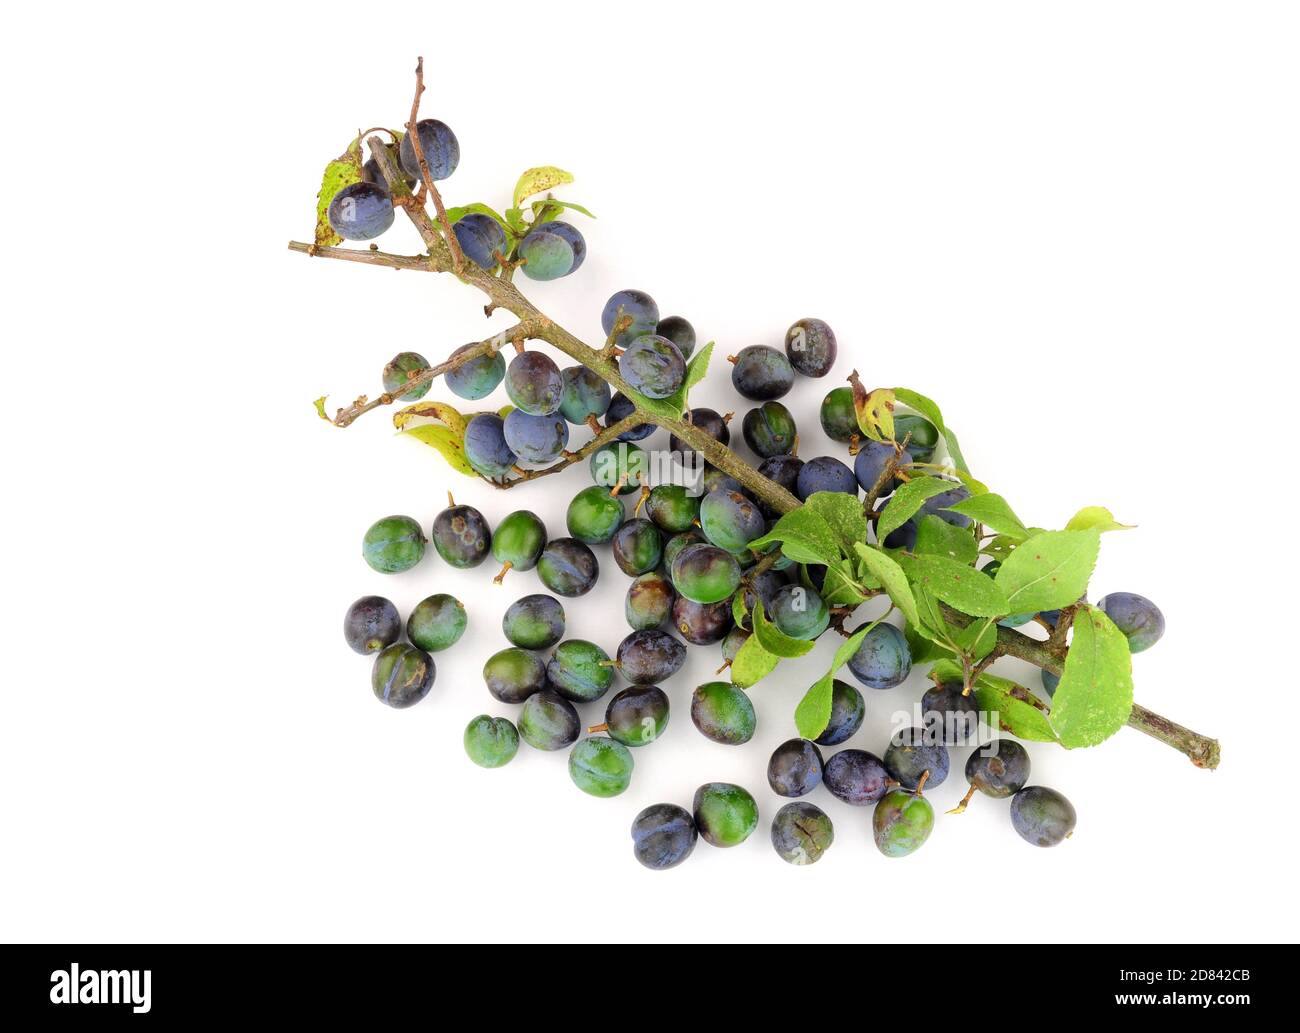 Sloe berries from the blackthorn bush used for making sloe gin and jam Stock Photo